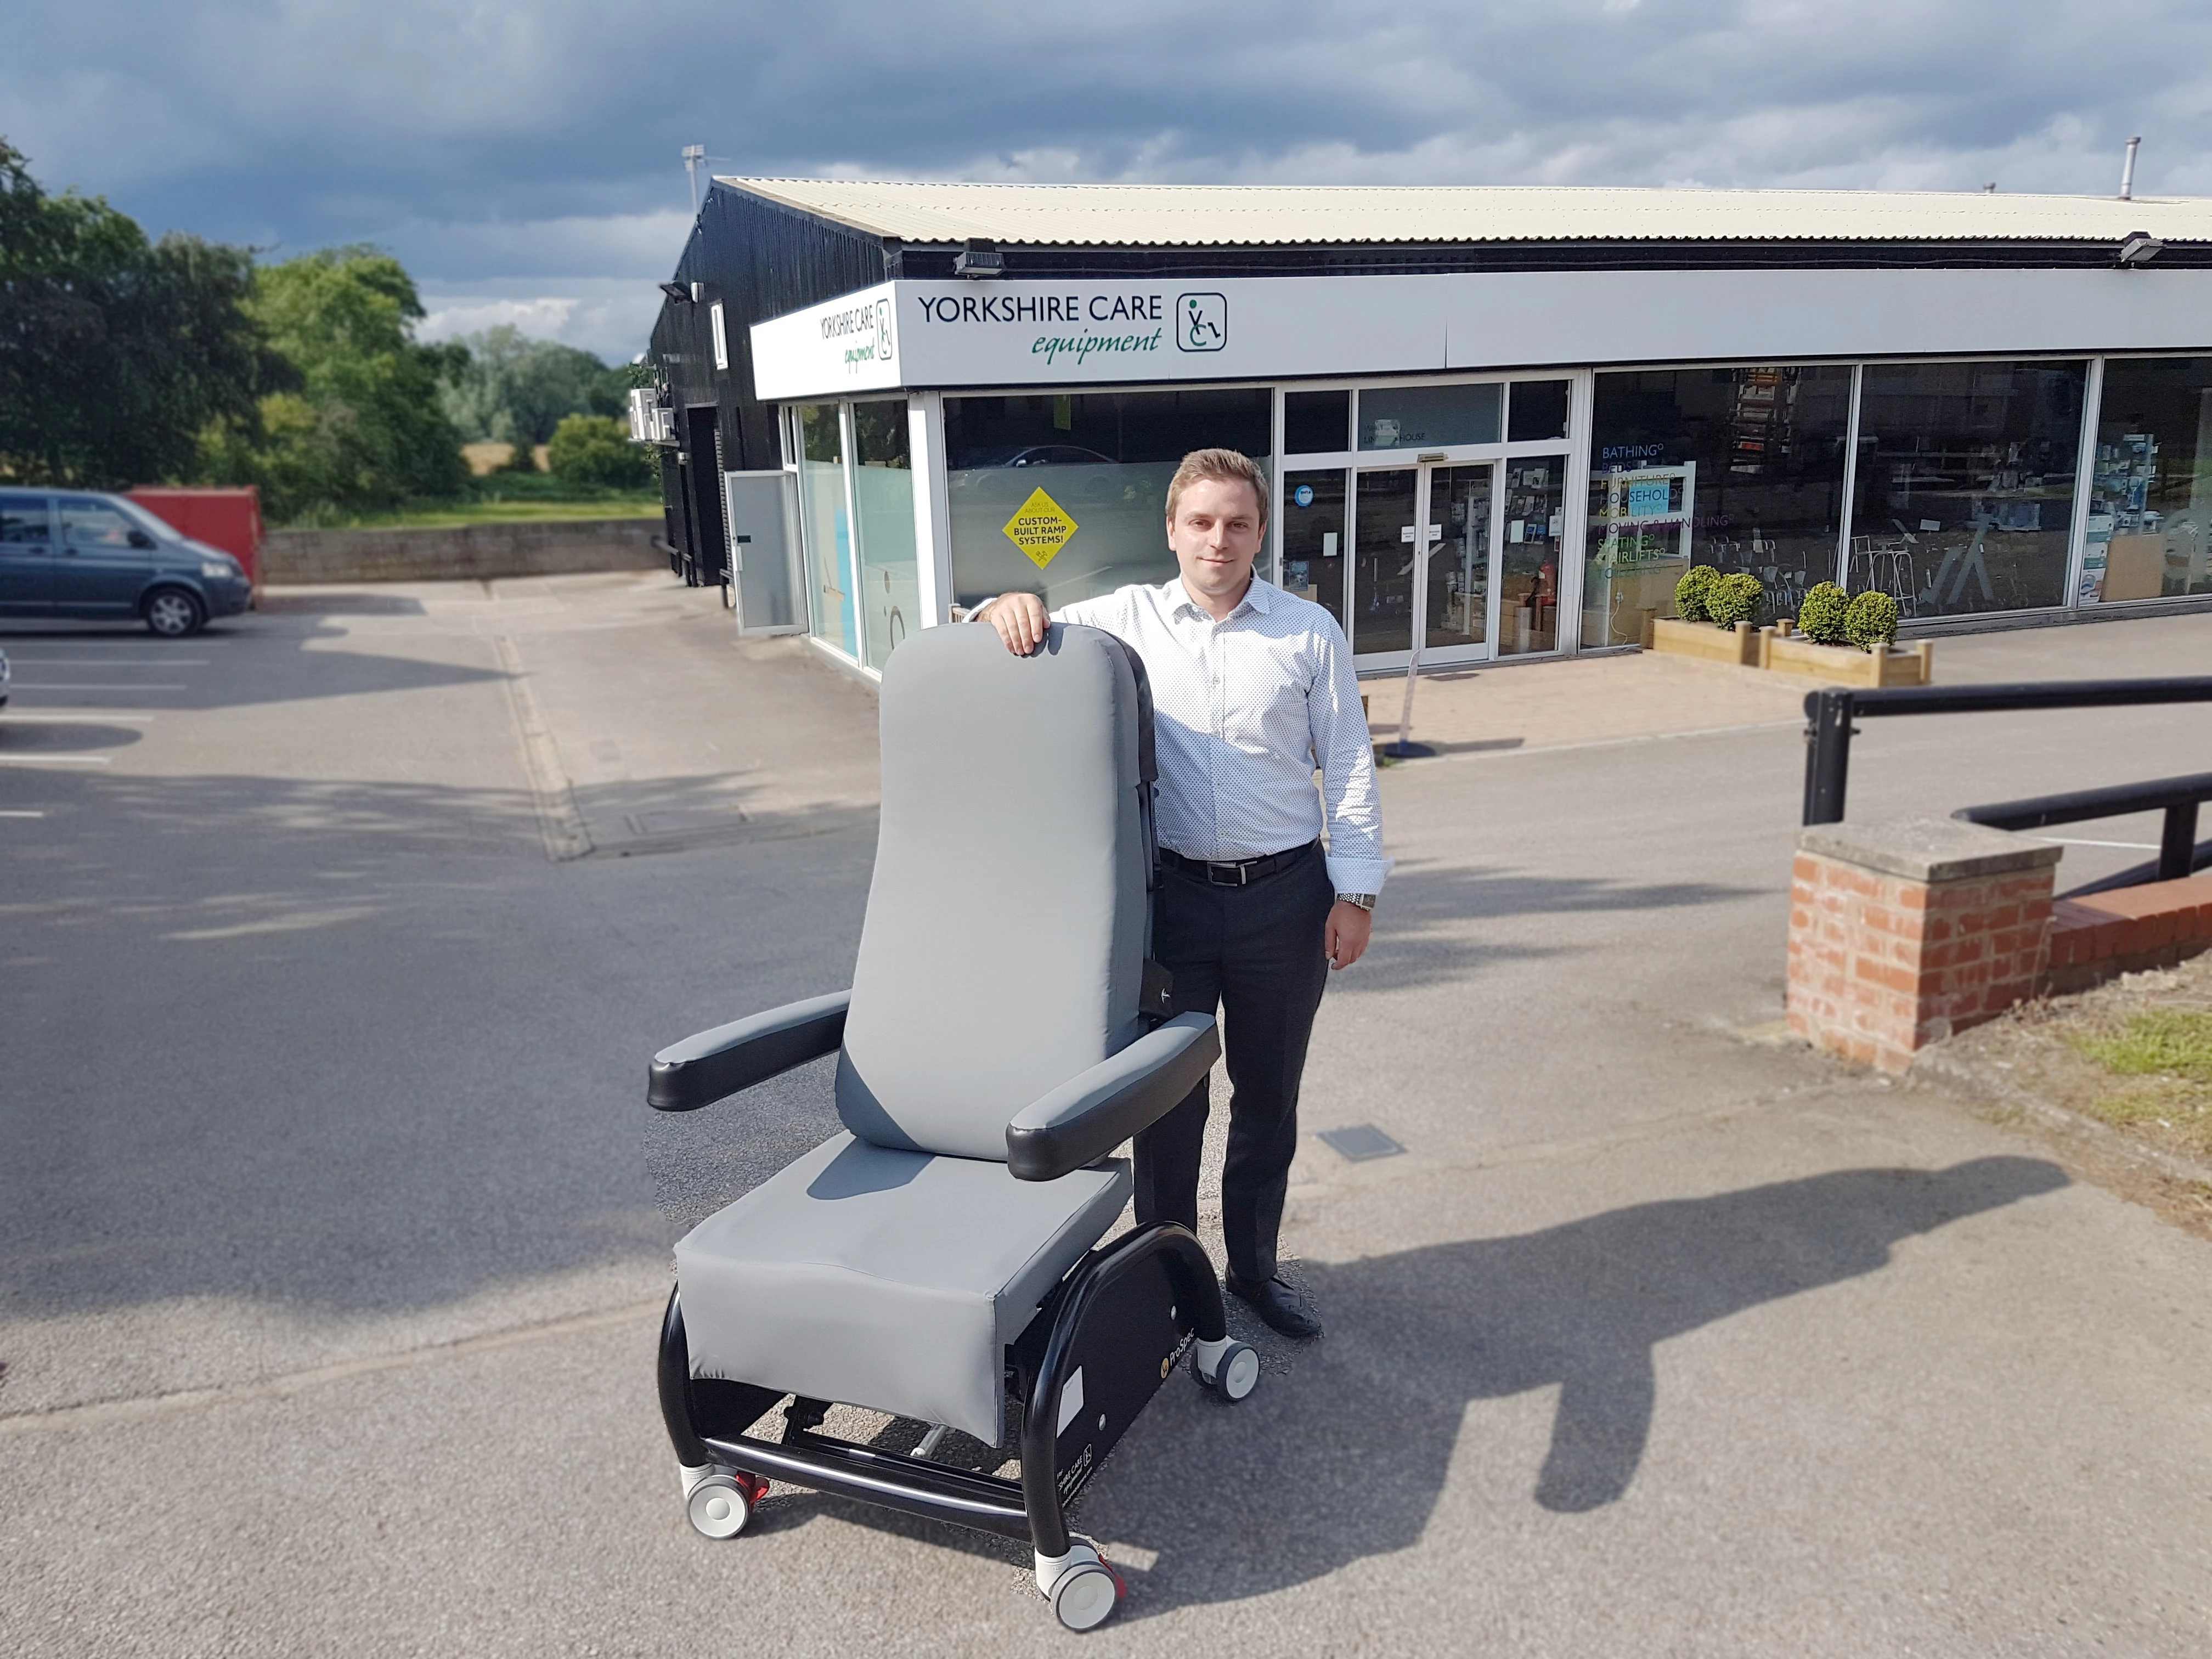 Yorkshire Care's Managing Director Tristan Hulbert with the ProSpec hospital chair